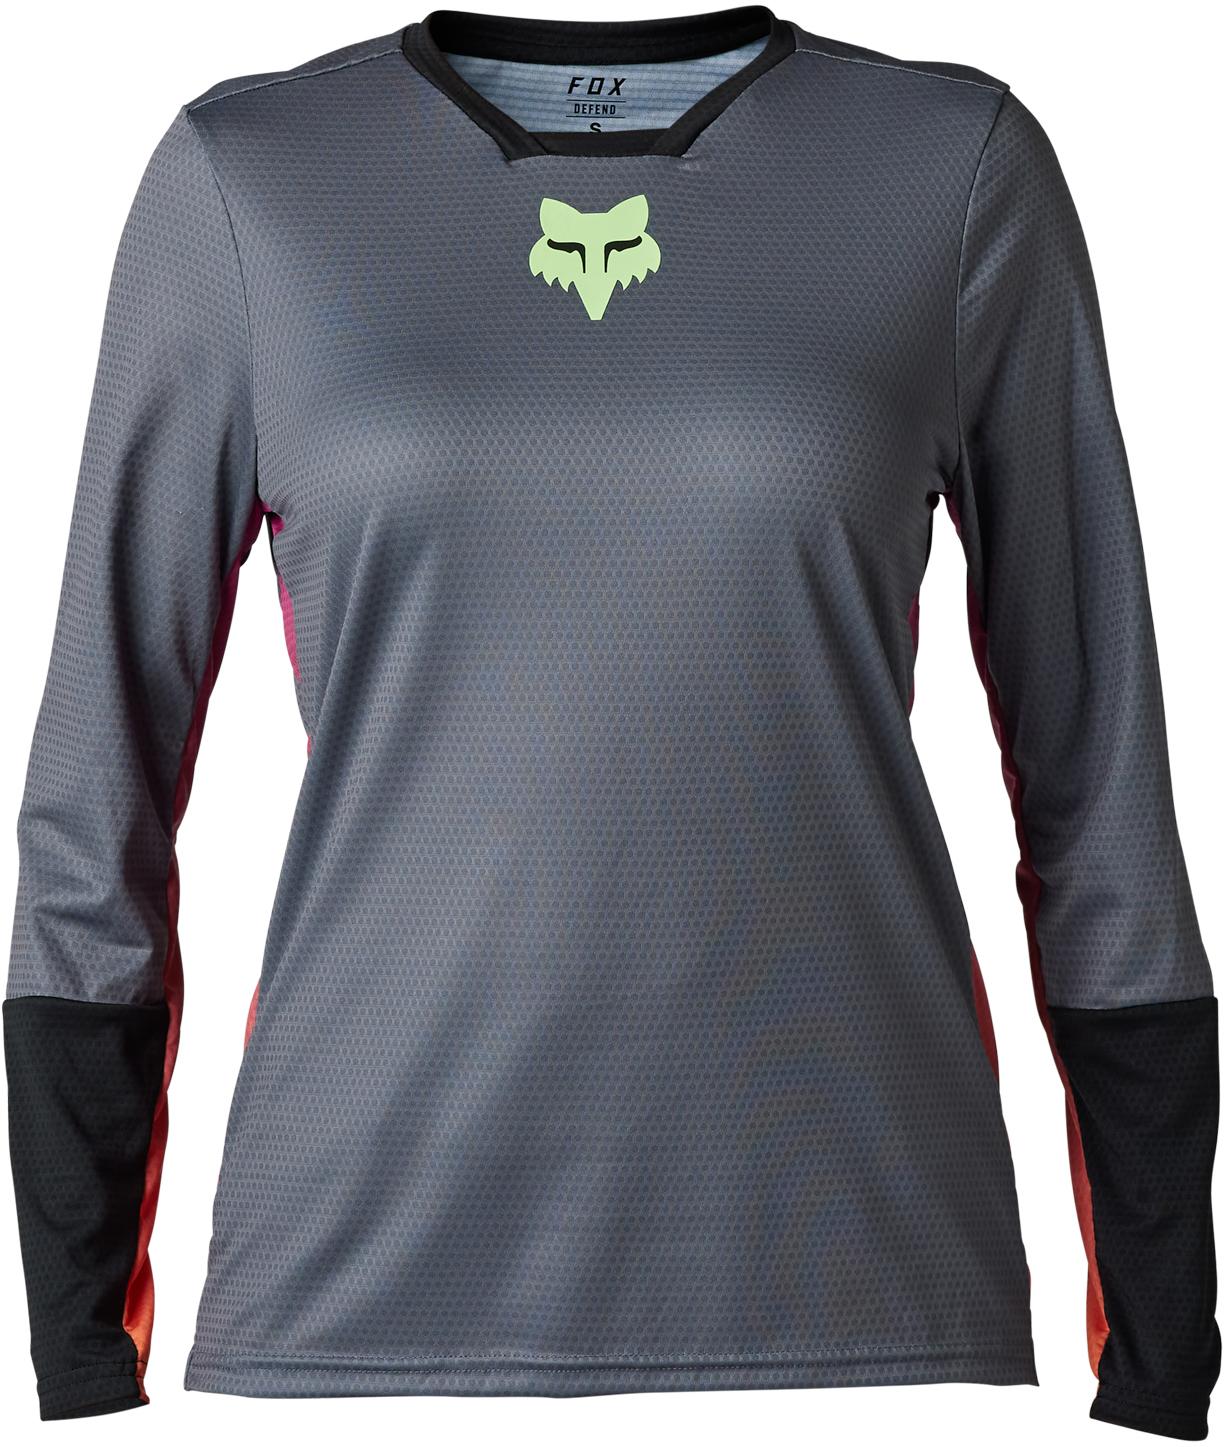 Fox Racing Womens Defend Race Long Sleeve Cycling Jersey - Pewter